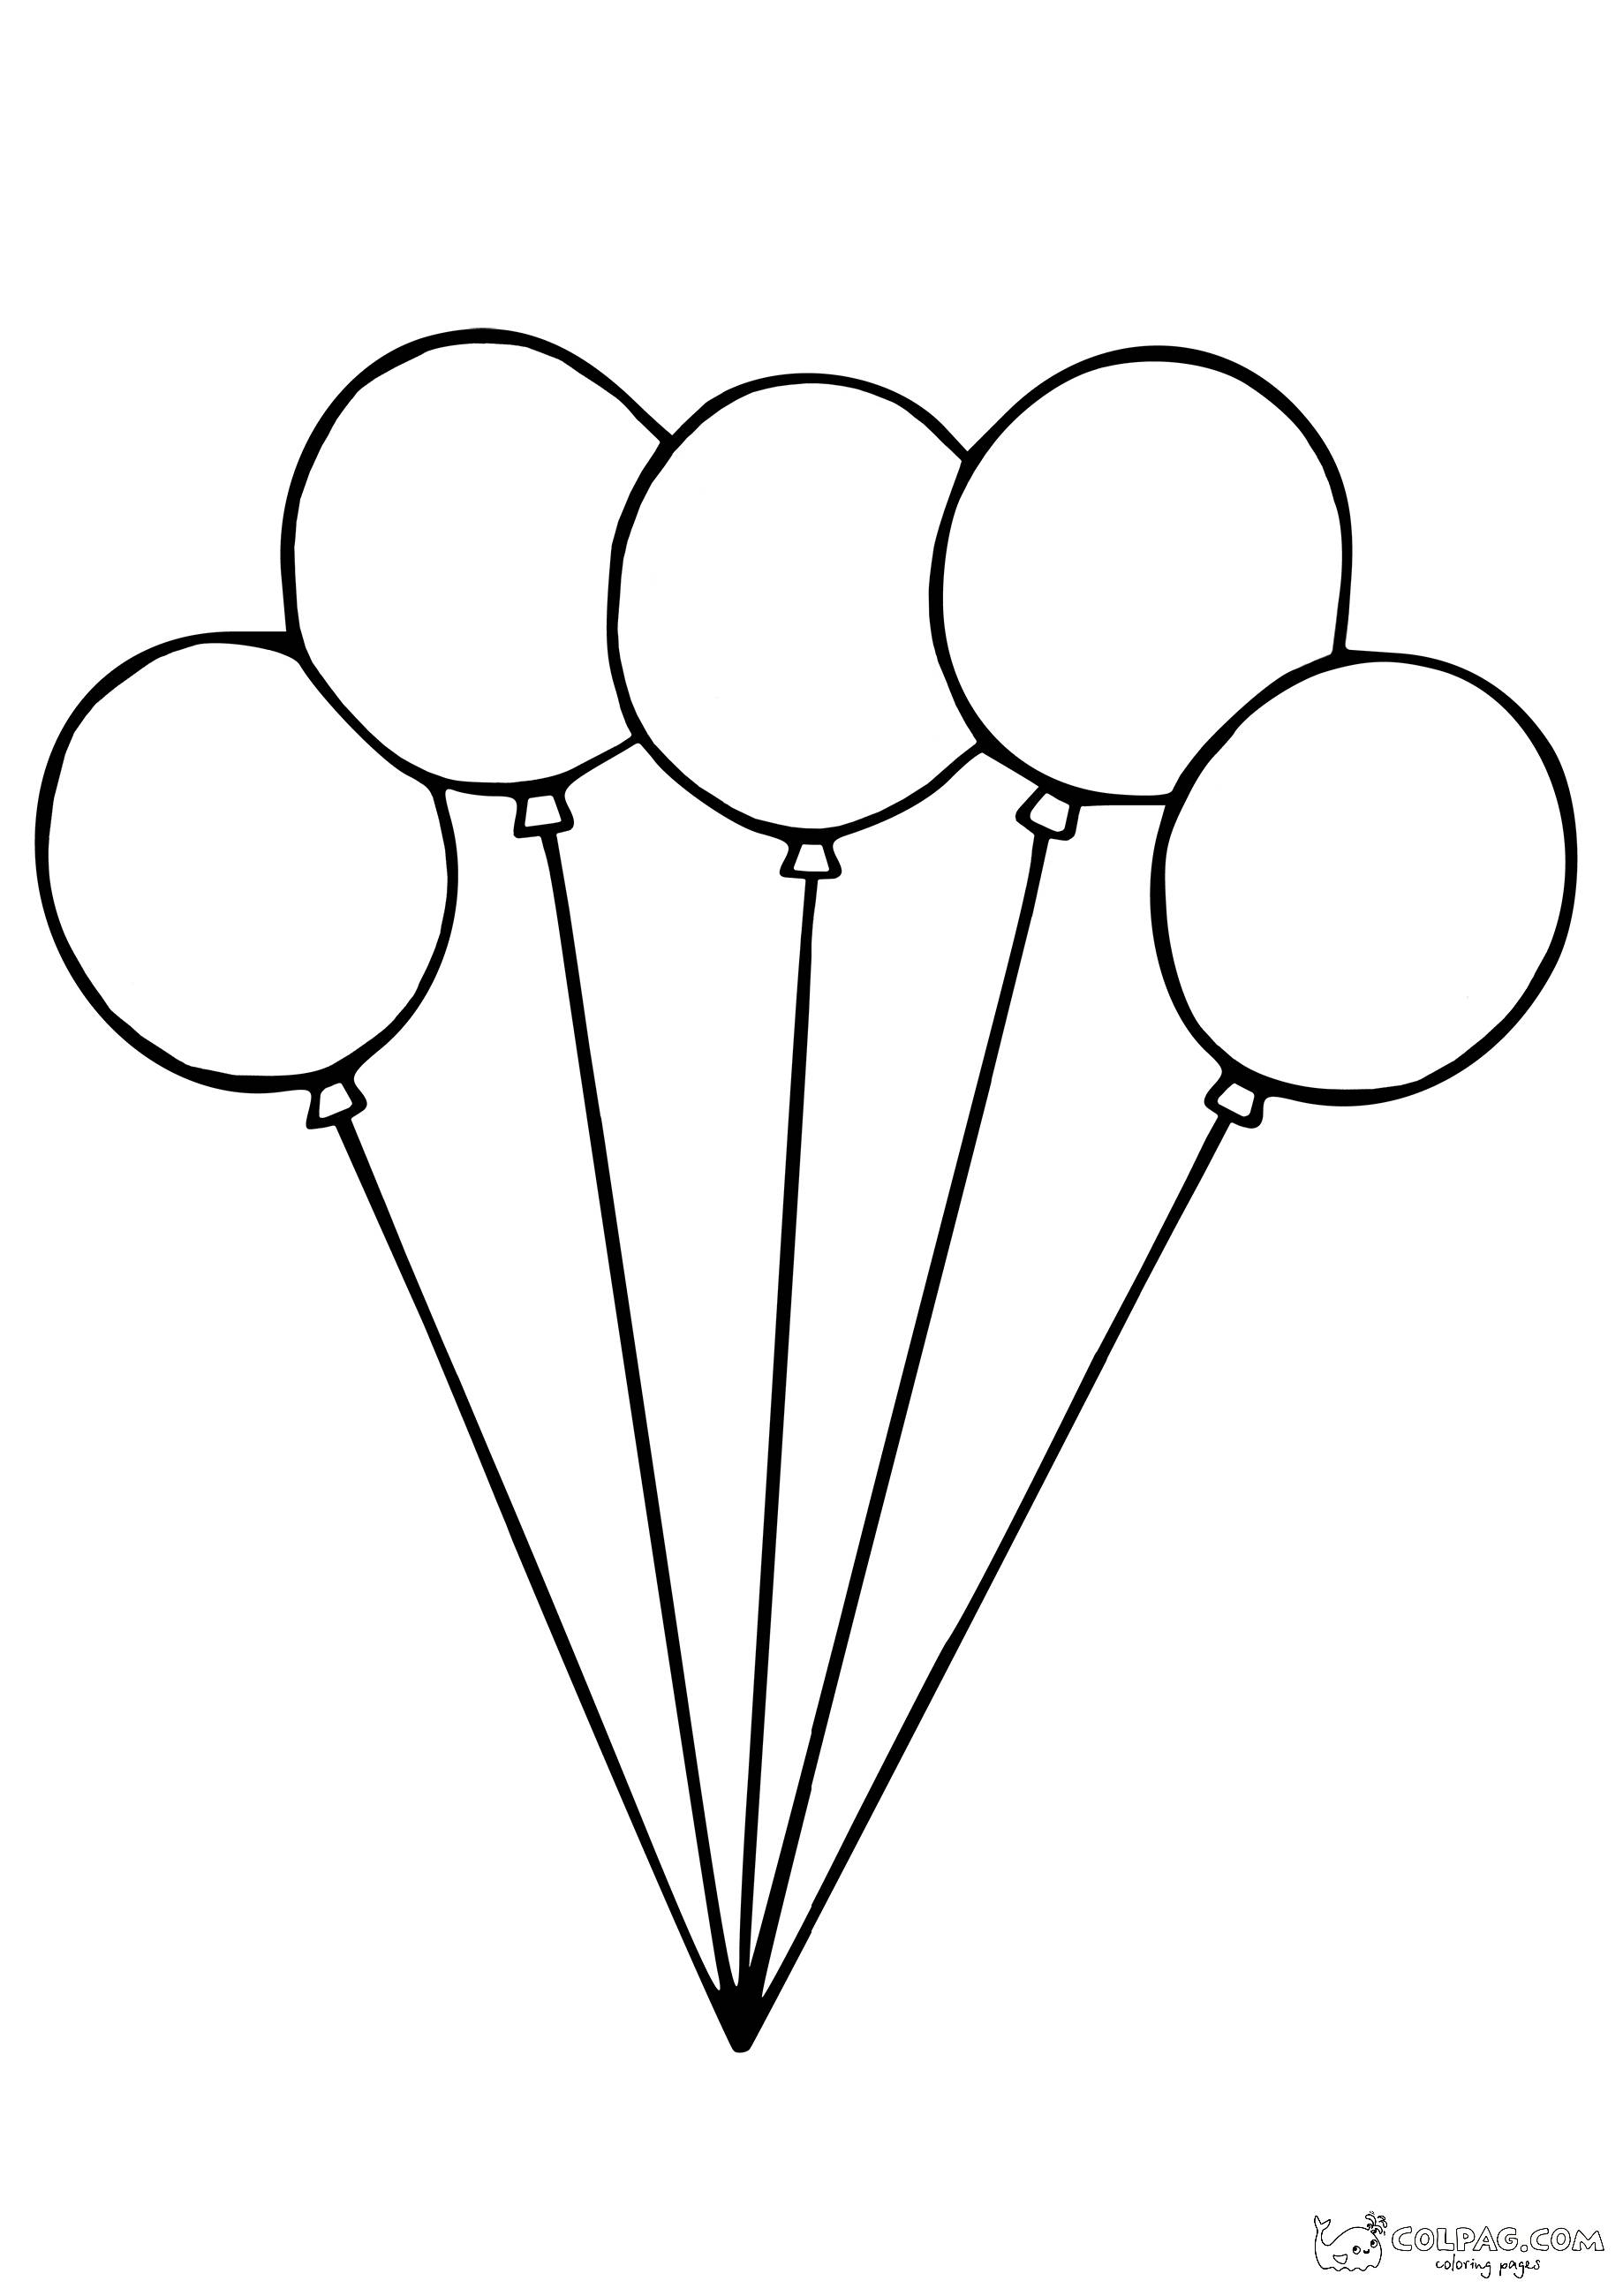 13-baloons-with-strait-ropes-coloring-page-colpag-13